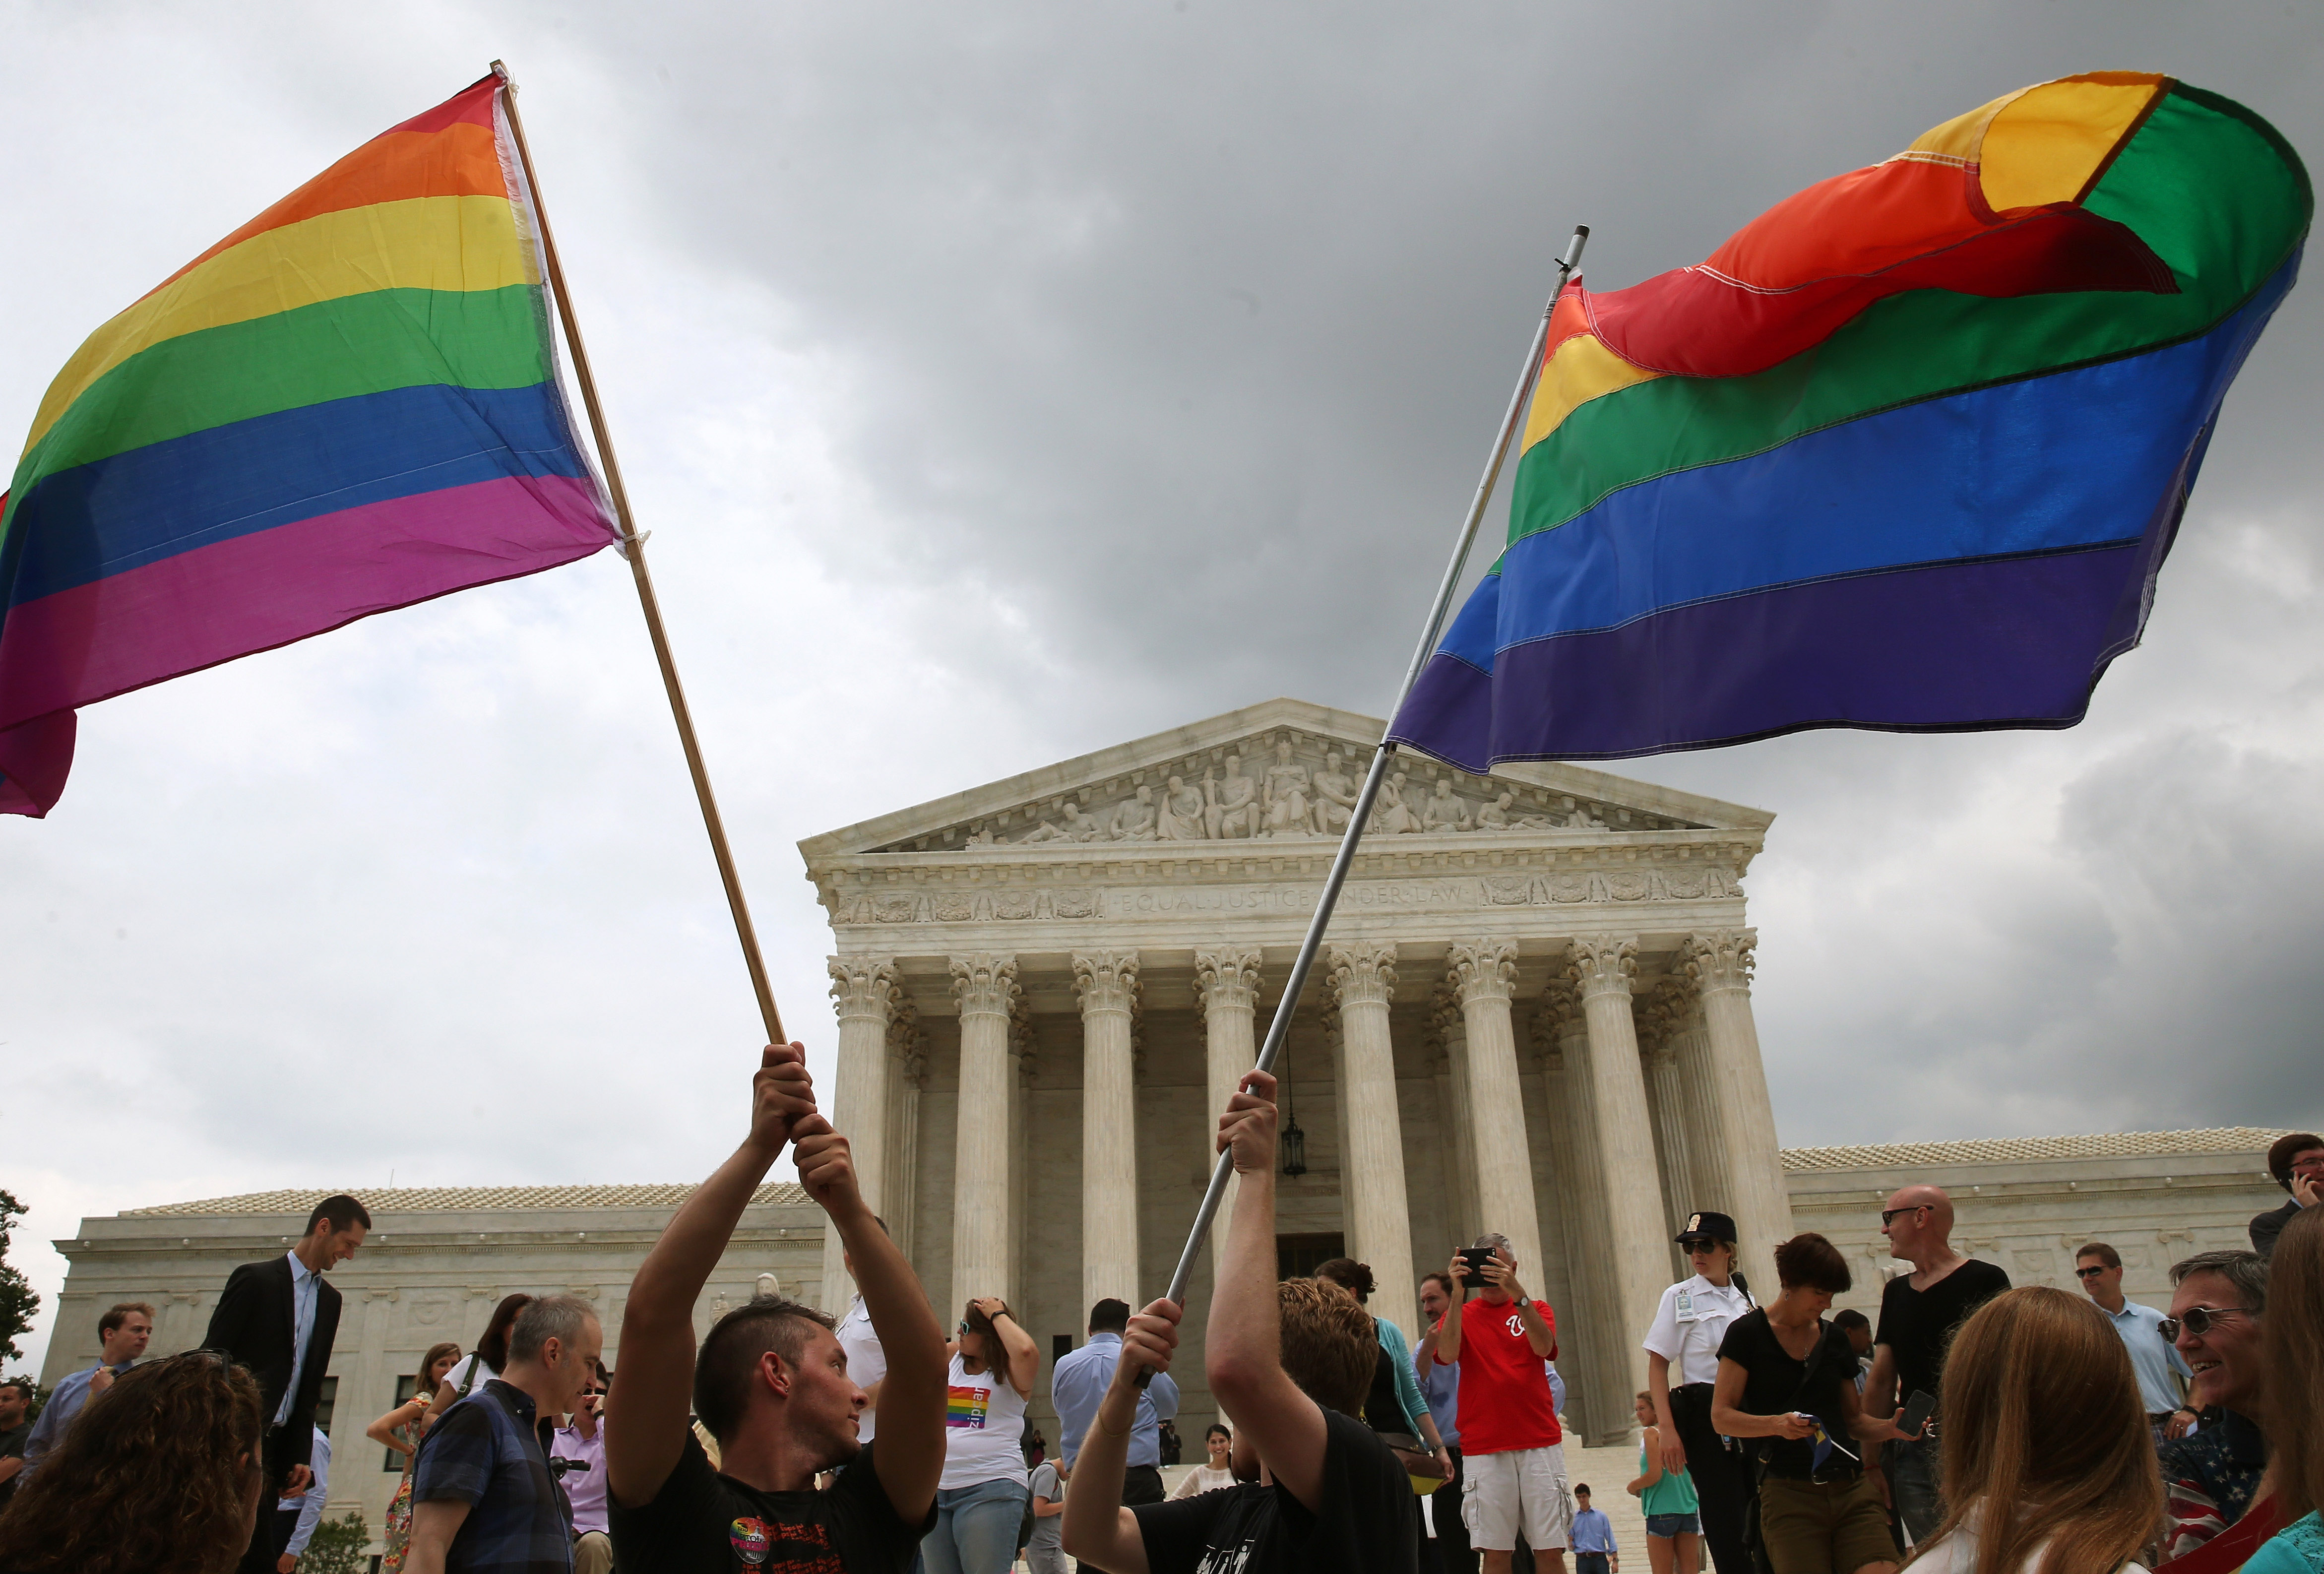 People celebrate in front of the U.S. Supreme Court after the ruling in favor of same-sex marriage June 26, 2015 in Washington, DC. The high court ruled that same-sex couples have the right to marry in all 50 states.  (Photo by Mark Wilson/Getty Images) (Mark Wilson&mdash;Getty Images)